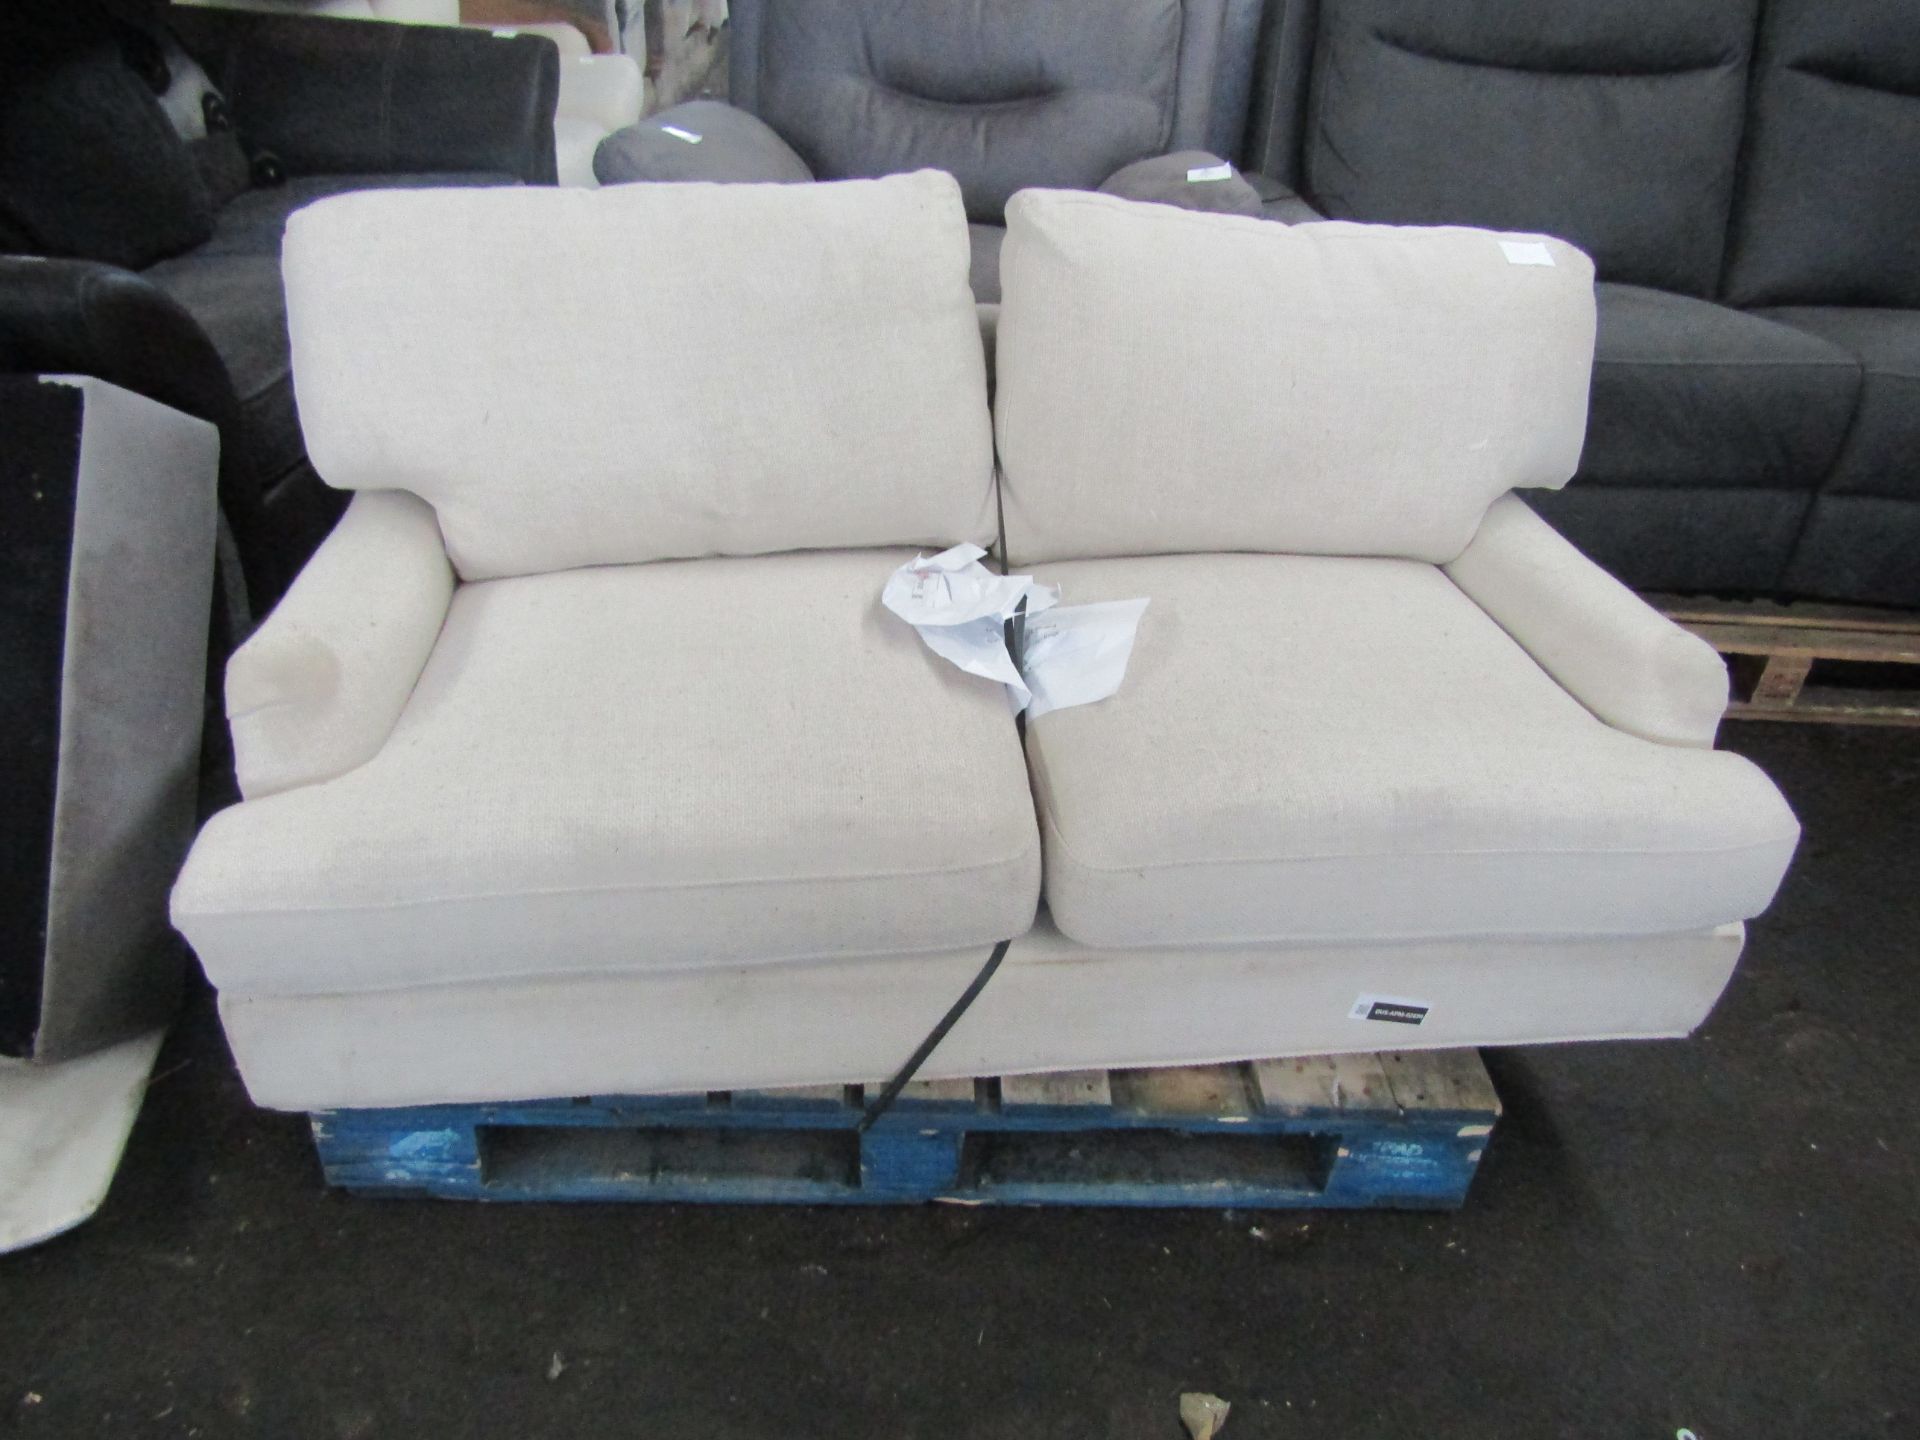 Dusk Hampshire 2 Seater Sofa - Beige RRP 699 About the Product(s) Hampshire 2 Seater Sofa - Beige In